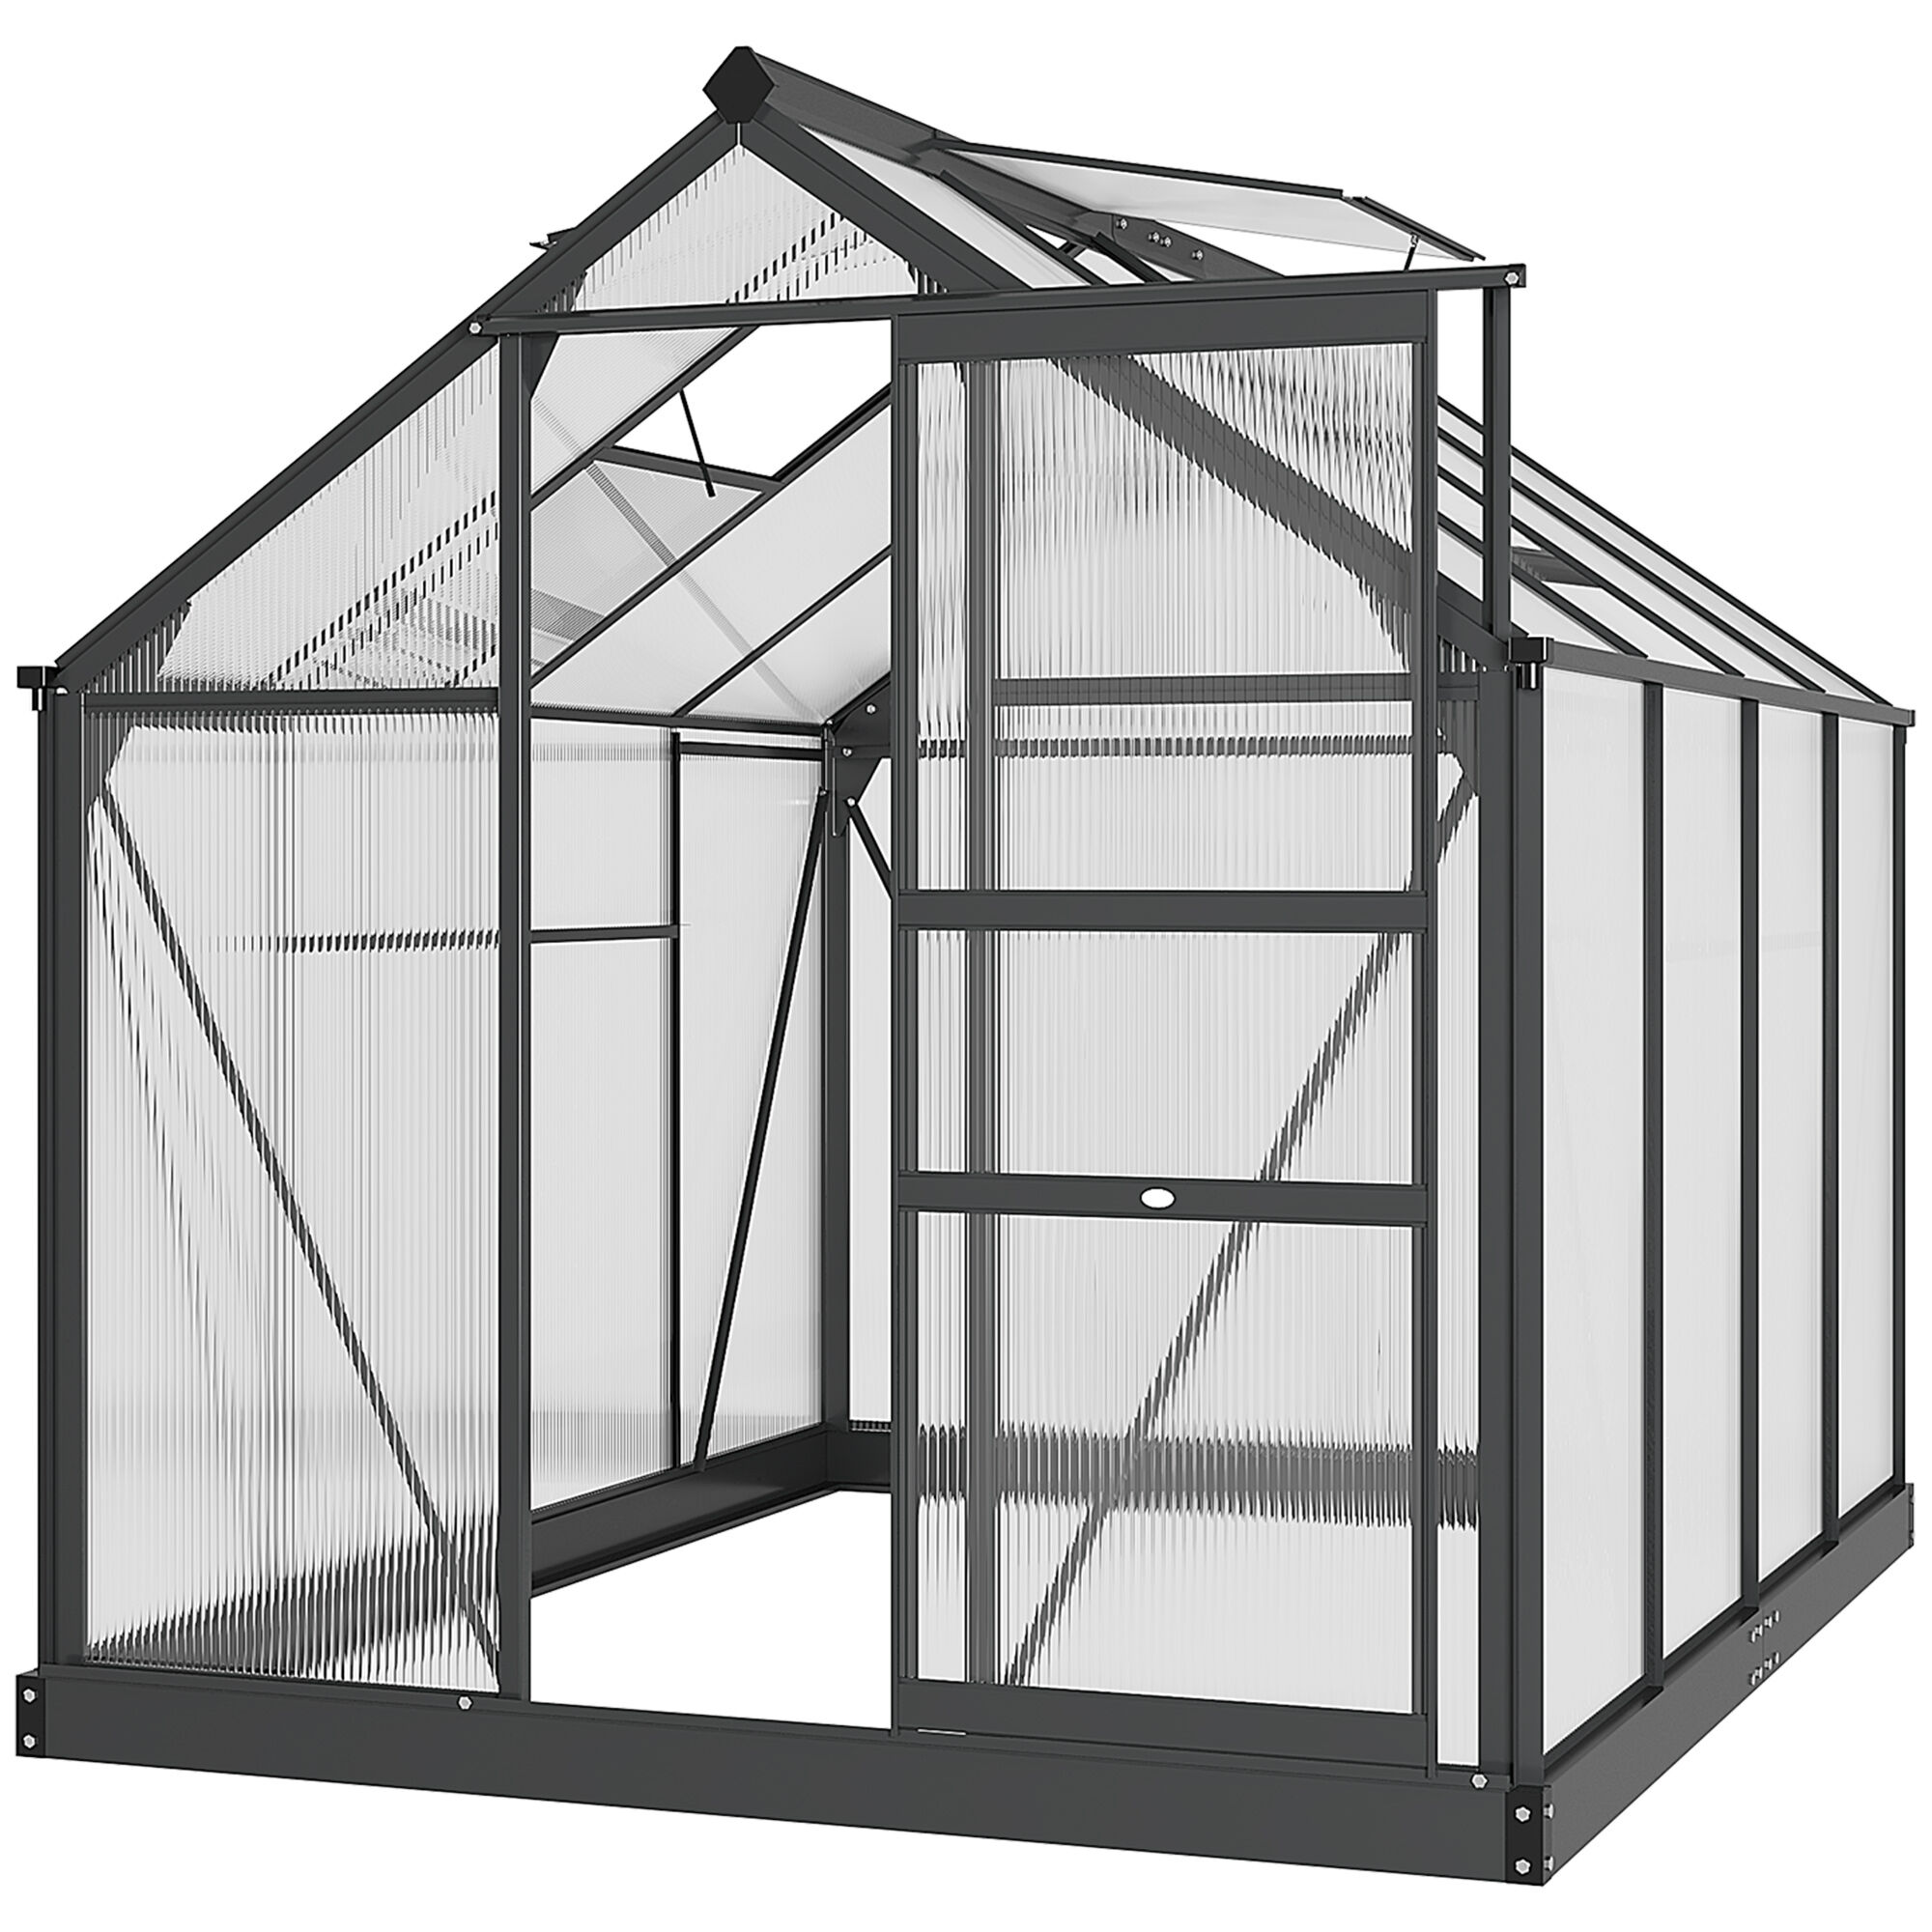 Outsunny 6' x 8' x 7' Polycarbonate Greenhouse, Outdoor Aluminum Walk-in Greenhouse Kit with Vent and Door for Backyard Garden, Gray